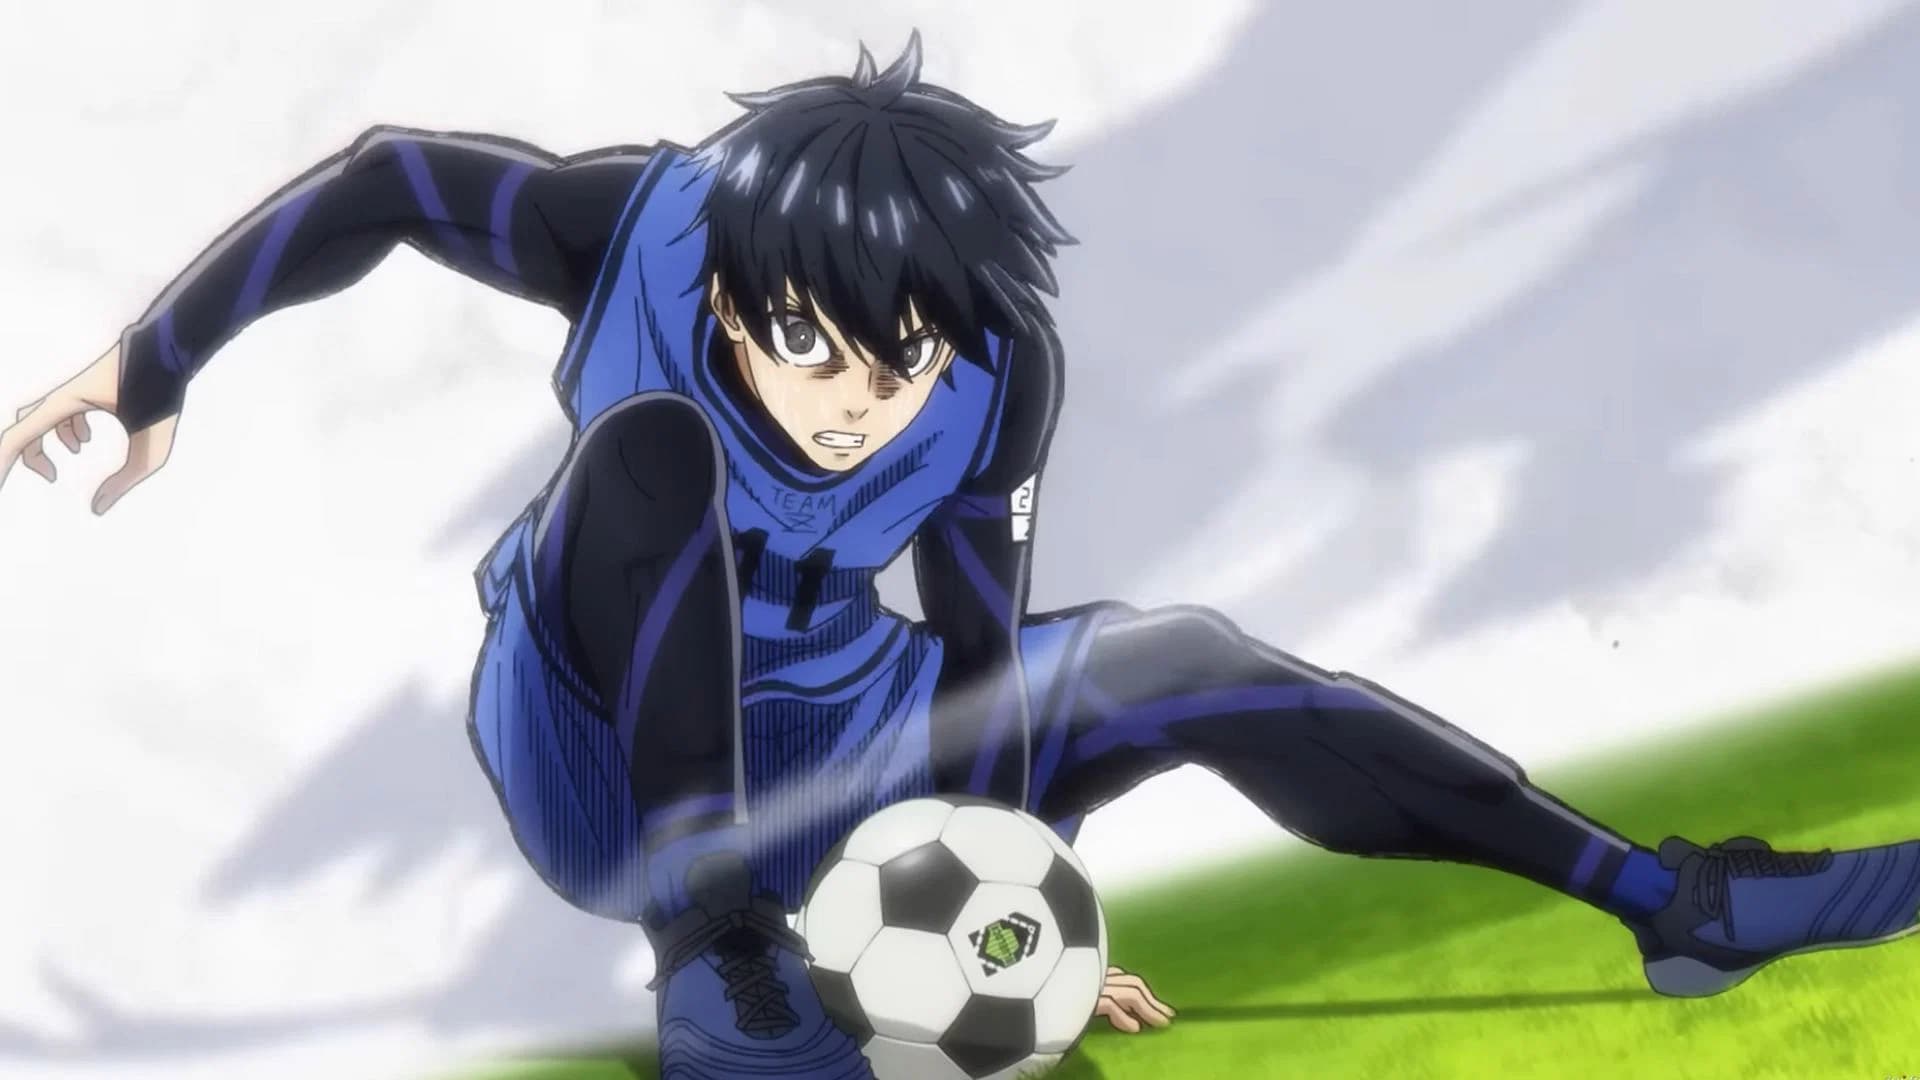 ⚽ Anime vs Manga for Blue Lock Episode 18 (Exclusive Preview